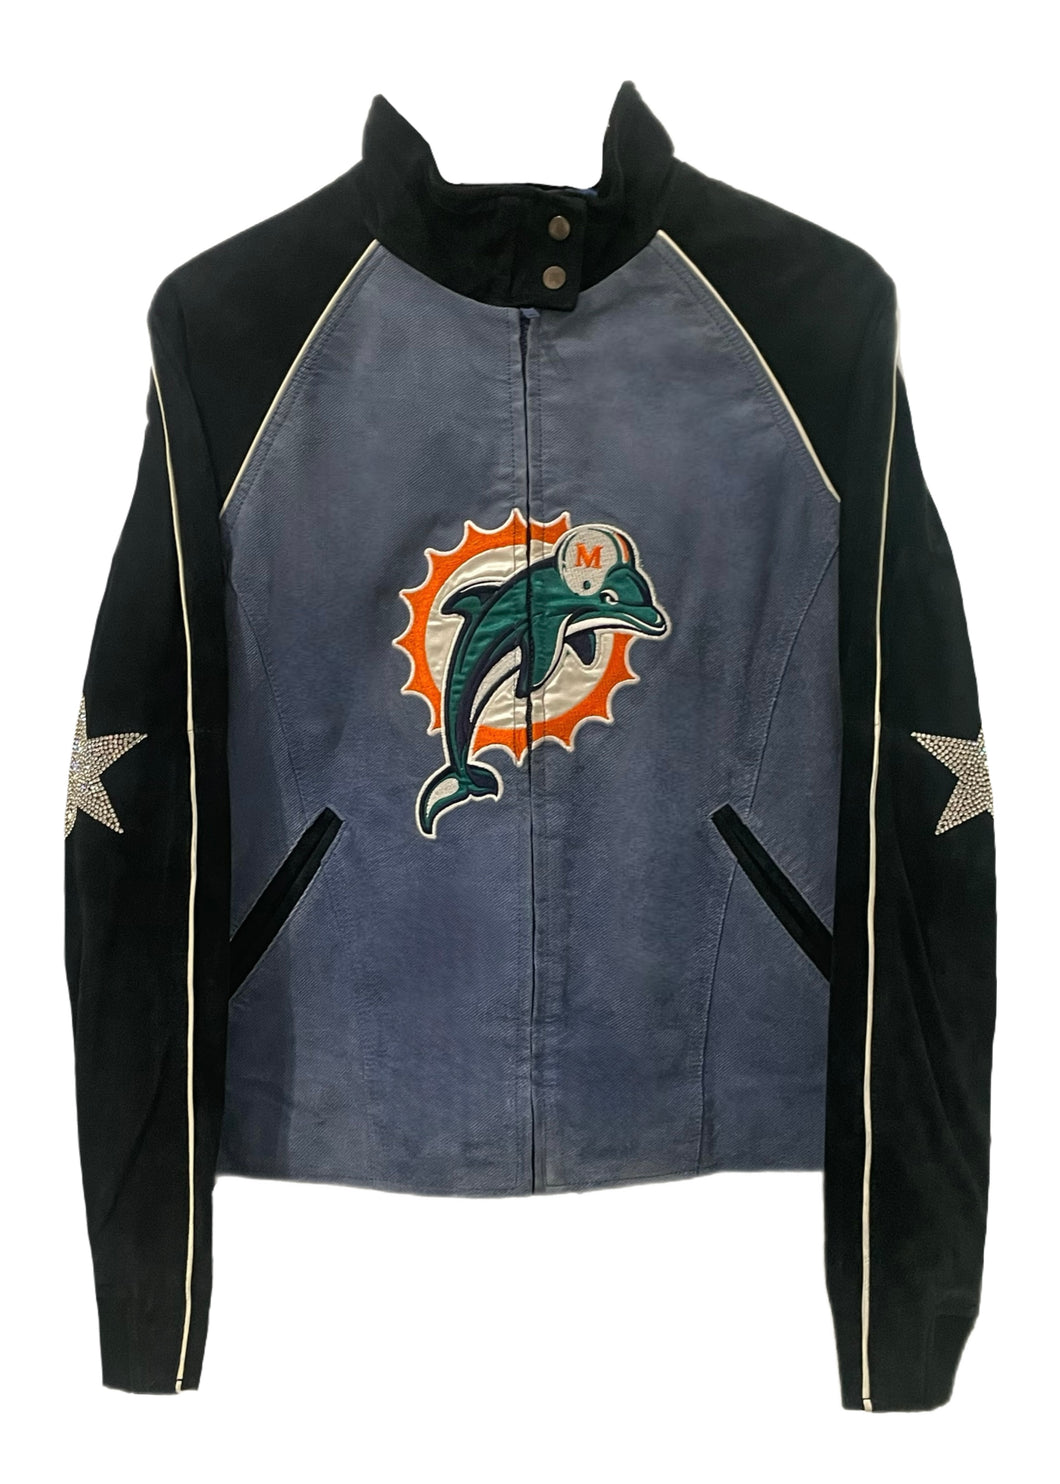 Miami Dolphins, Football “Rare Find” One of a KIND Vintage Suede Jacket with Crystal Star Design